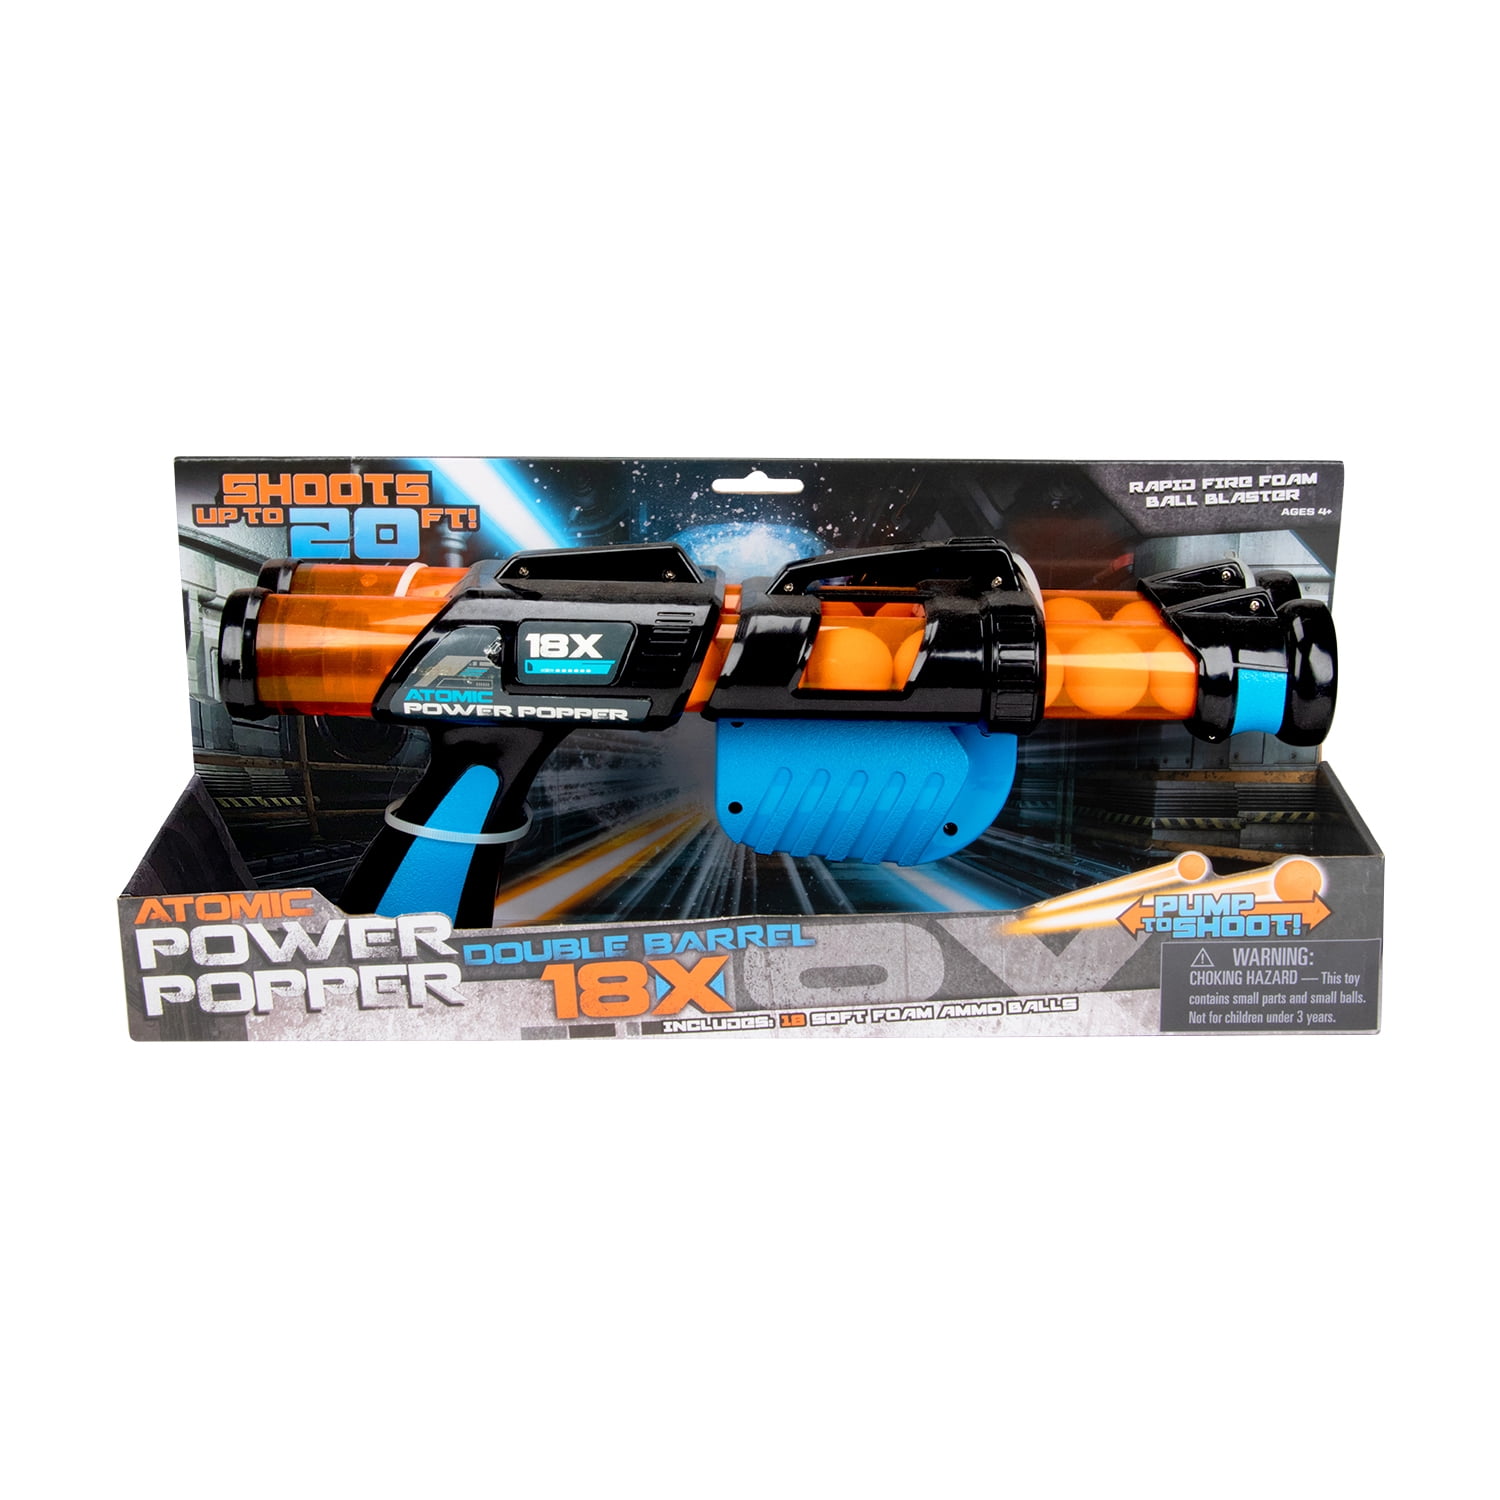 2 Atomic Fast and easy Reloads Power Popper Battle Pack with 84 Balls Hog Wild 